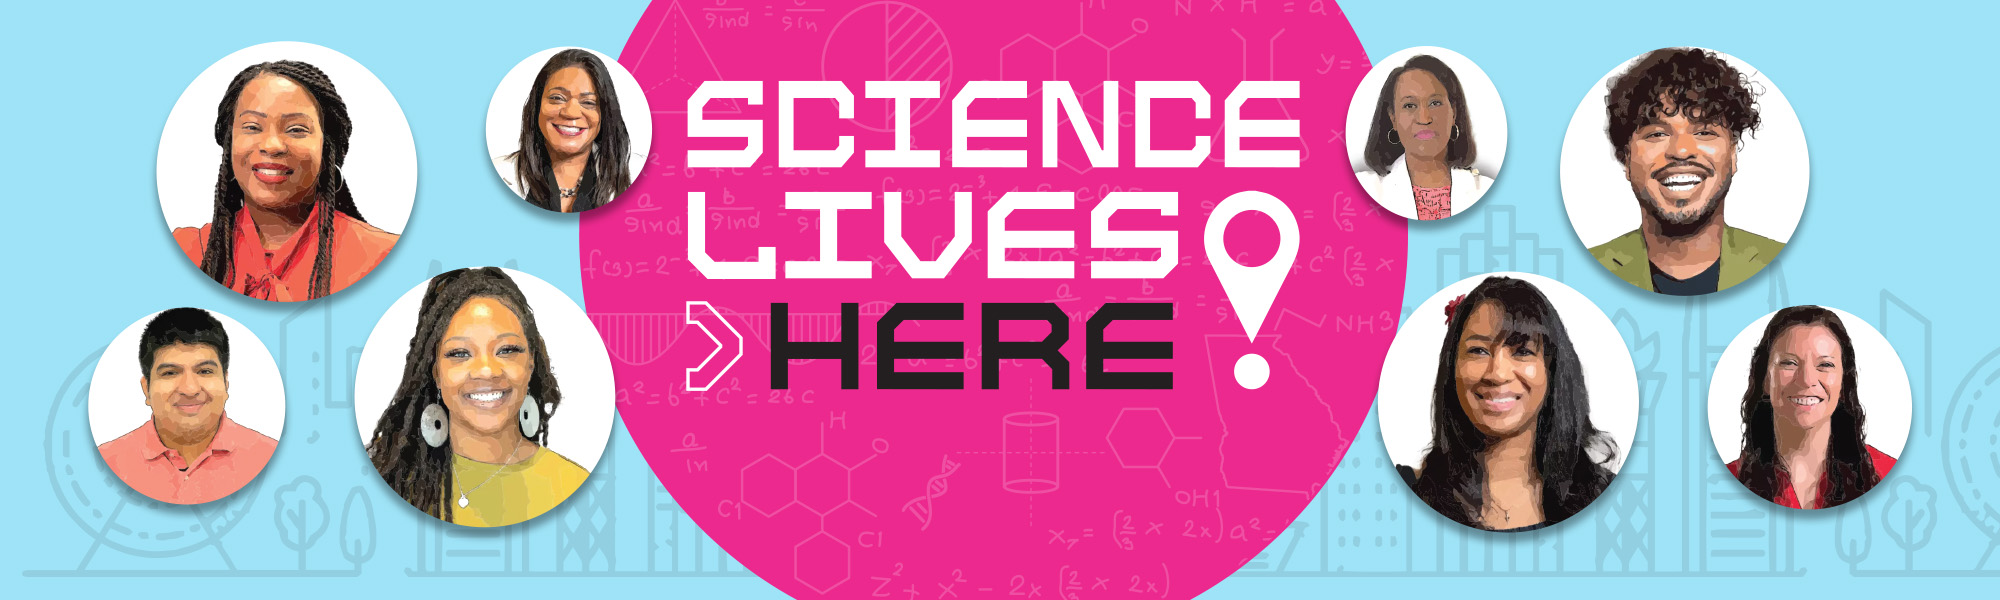 Headshots of multiple scientists and the Science Lives Here logo